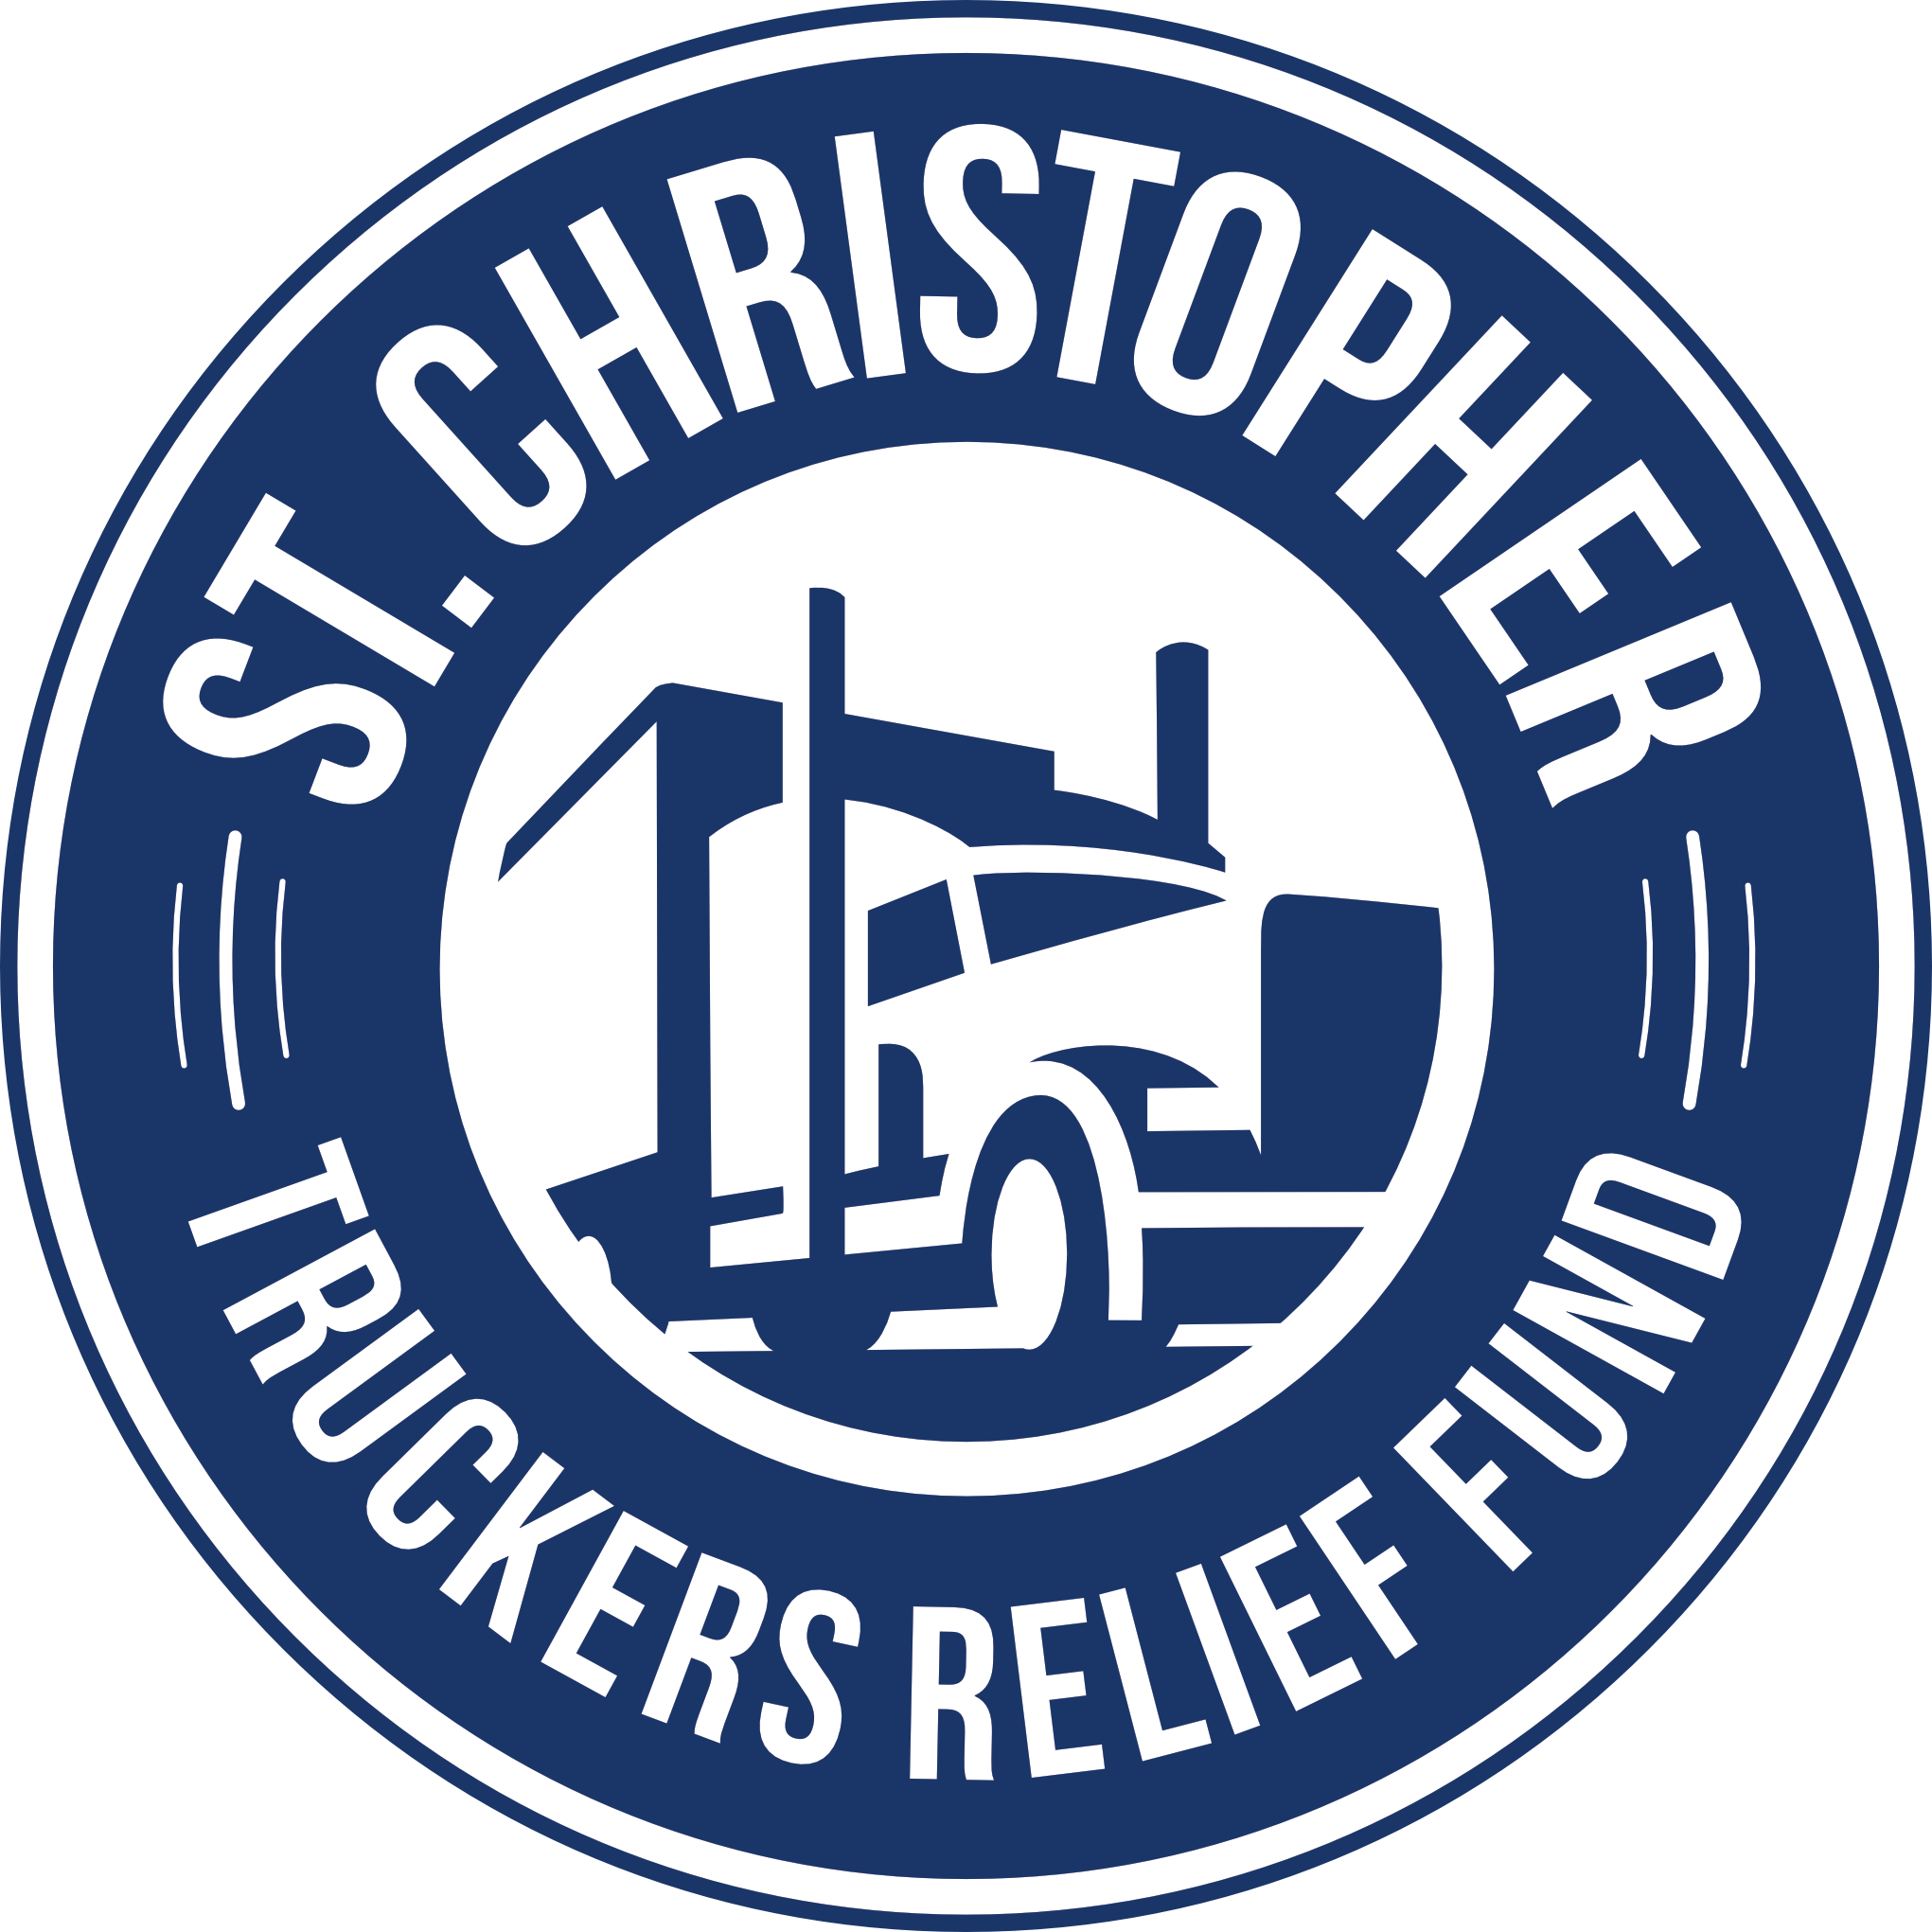 St. Christopher Truckers Relief Fund Logo